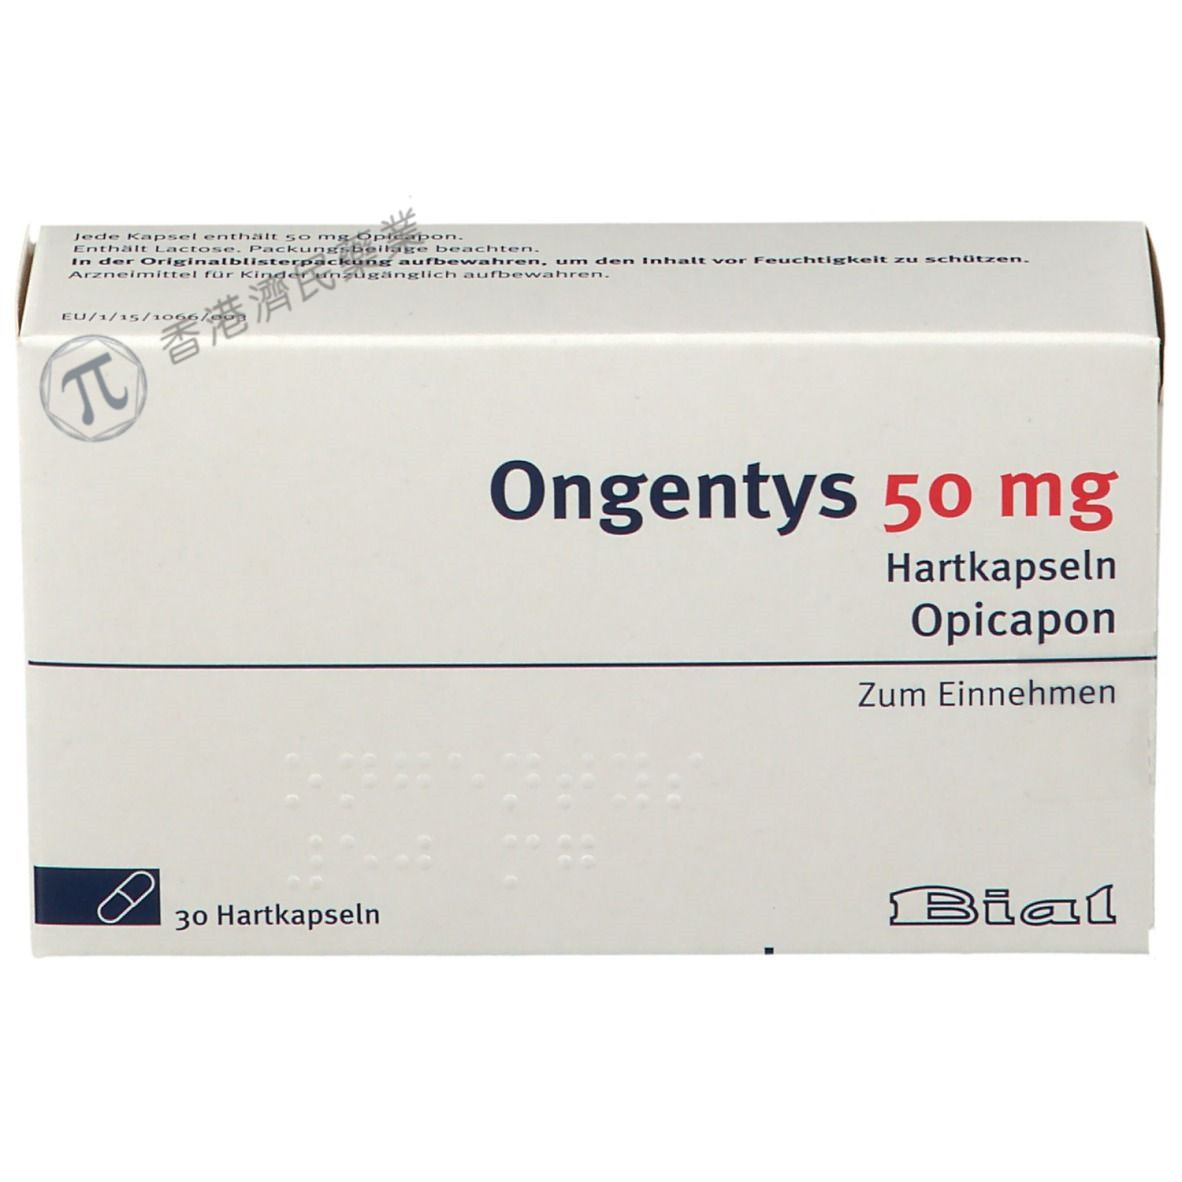 Ongentys(opicapone)